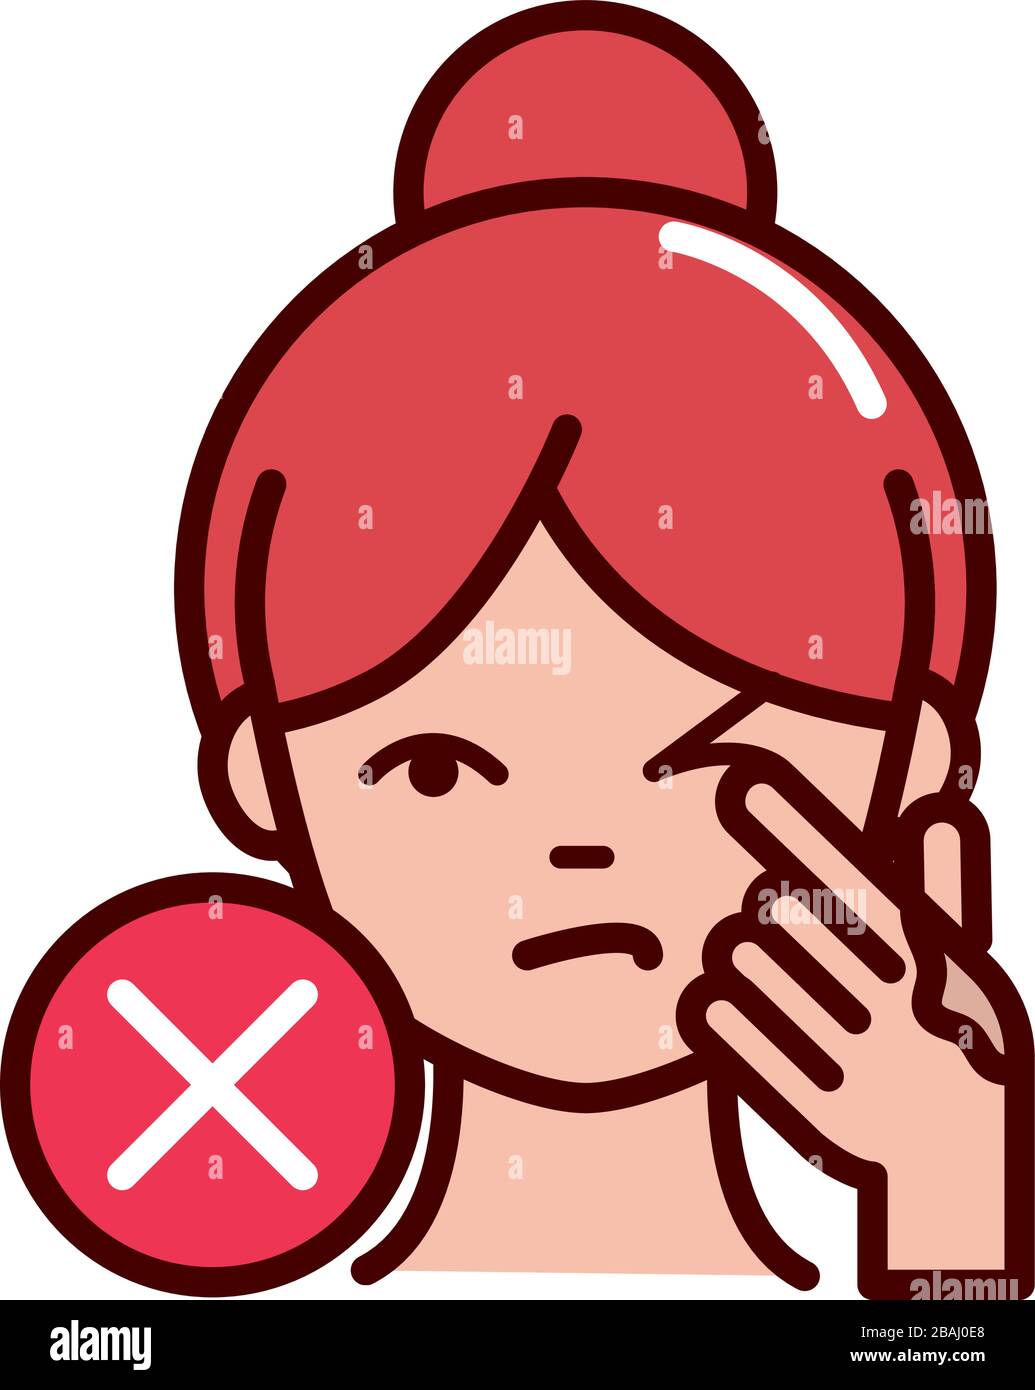 avoid touching eyes instructions to prevent the spread of covid-19 vector illustration line and file icon Stock Vector